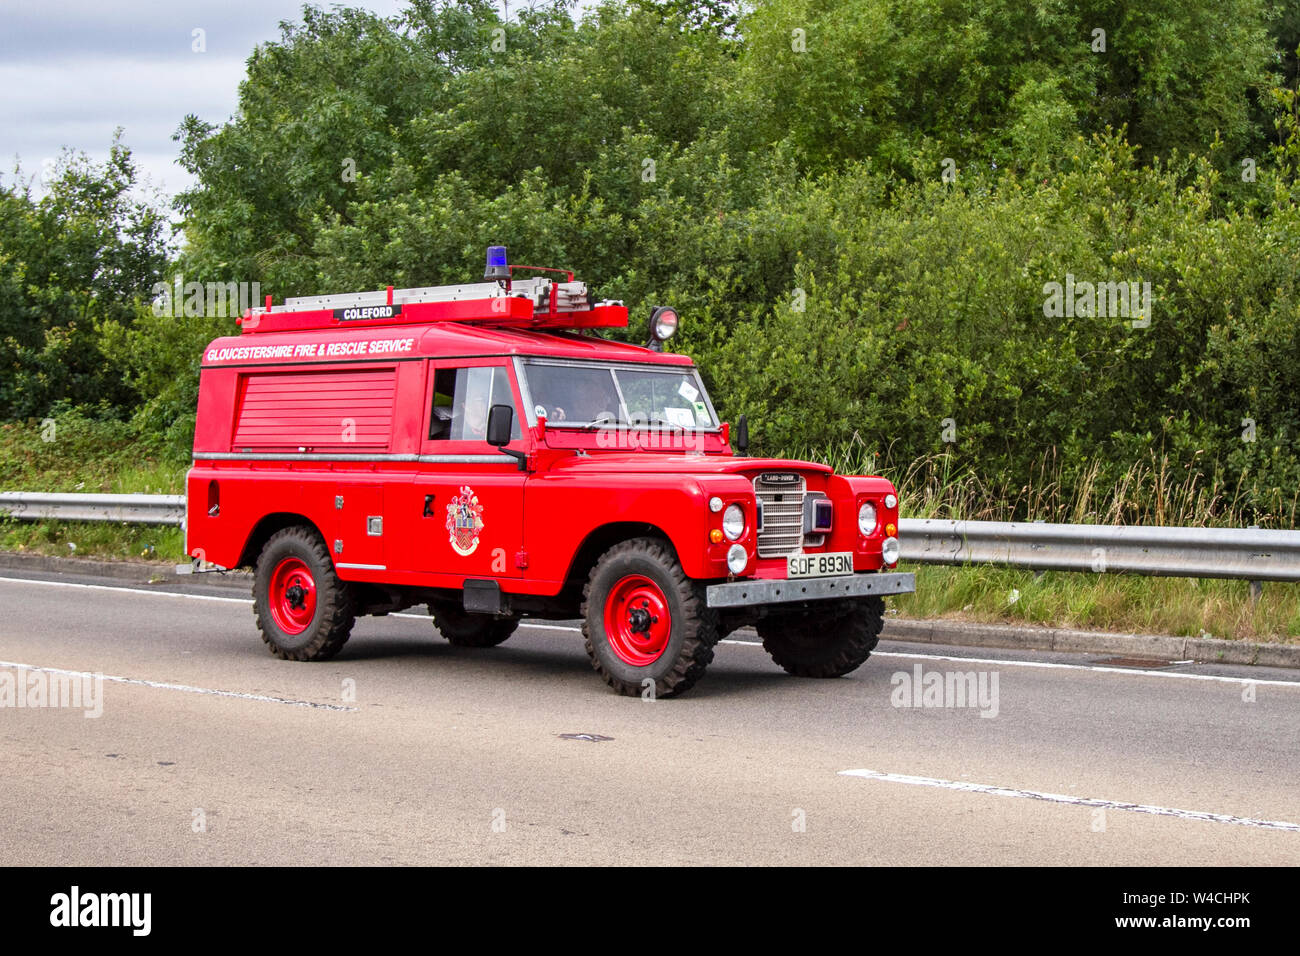 1974 70s Red Land Rover fire engine LCV, Gl Sunday 2019; a festival of Transport held in the seaside town of Fleetwood, Lancashire, UK Stock Photo